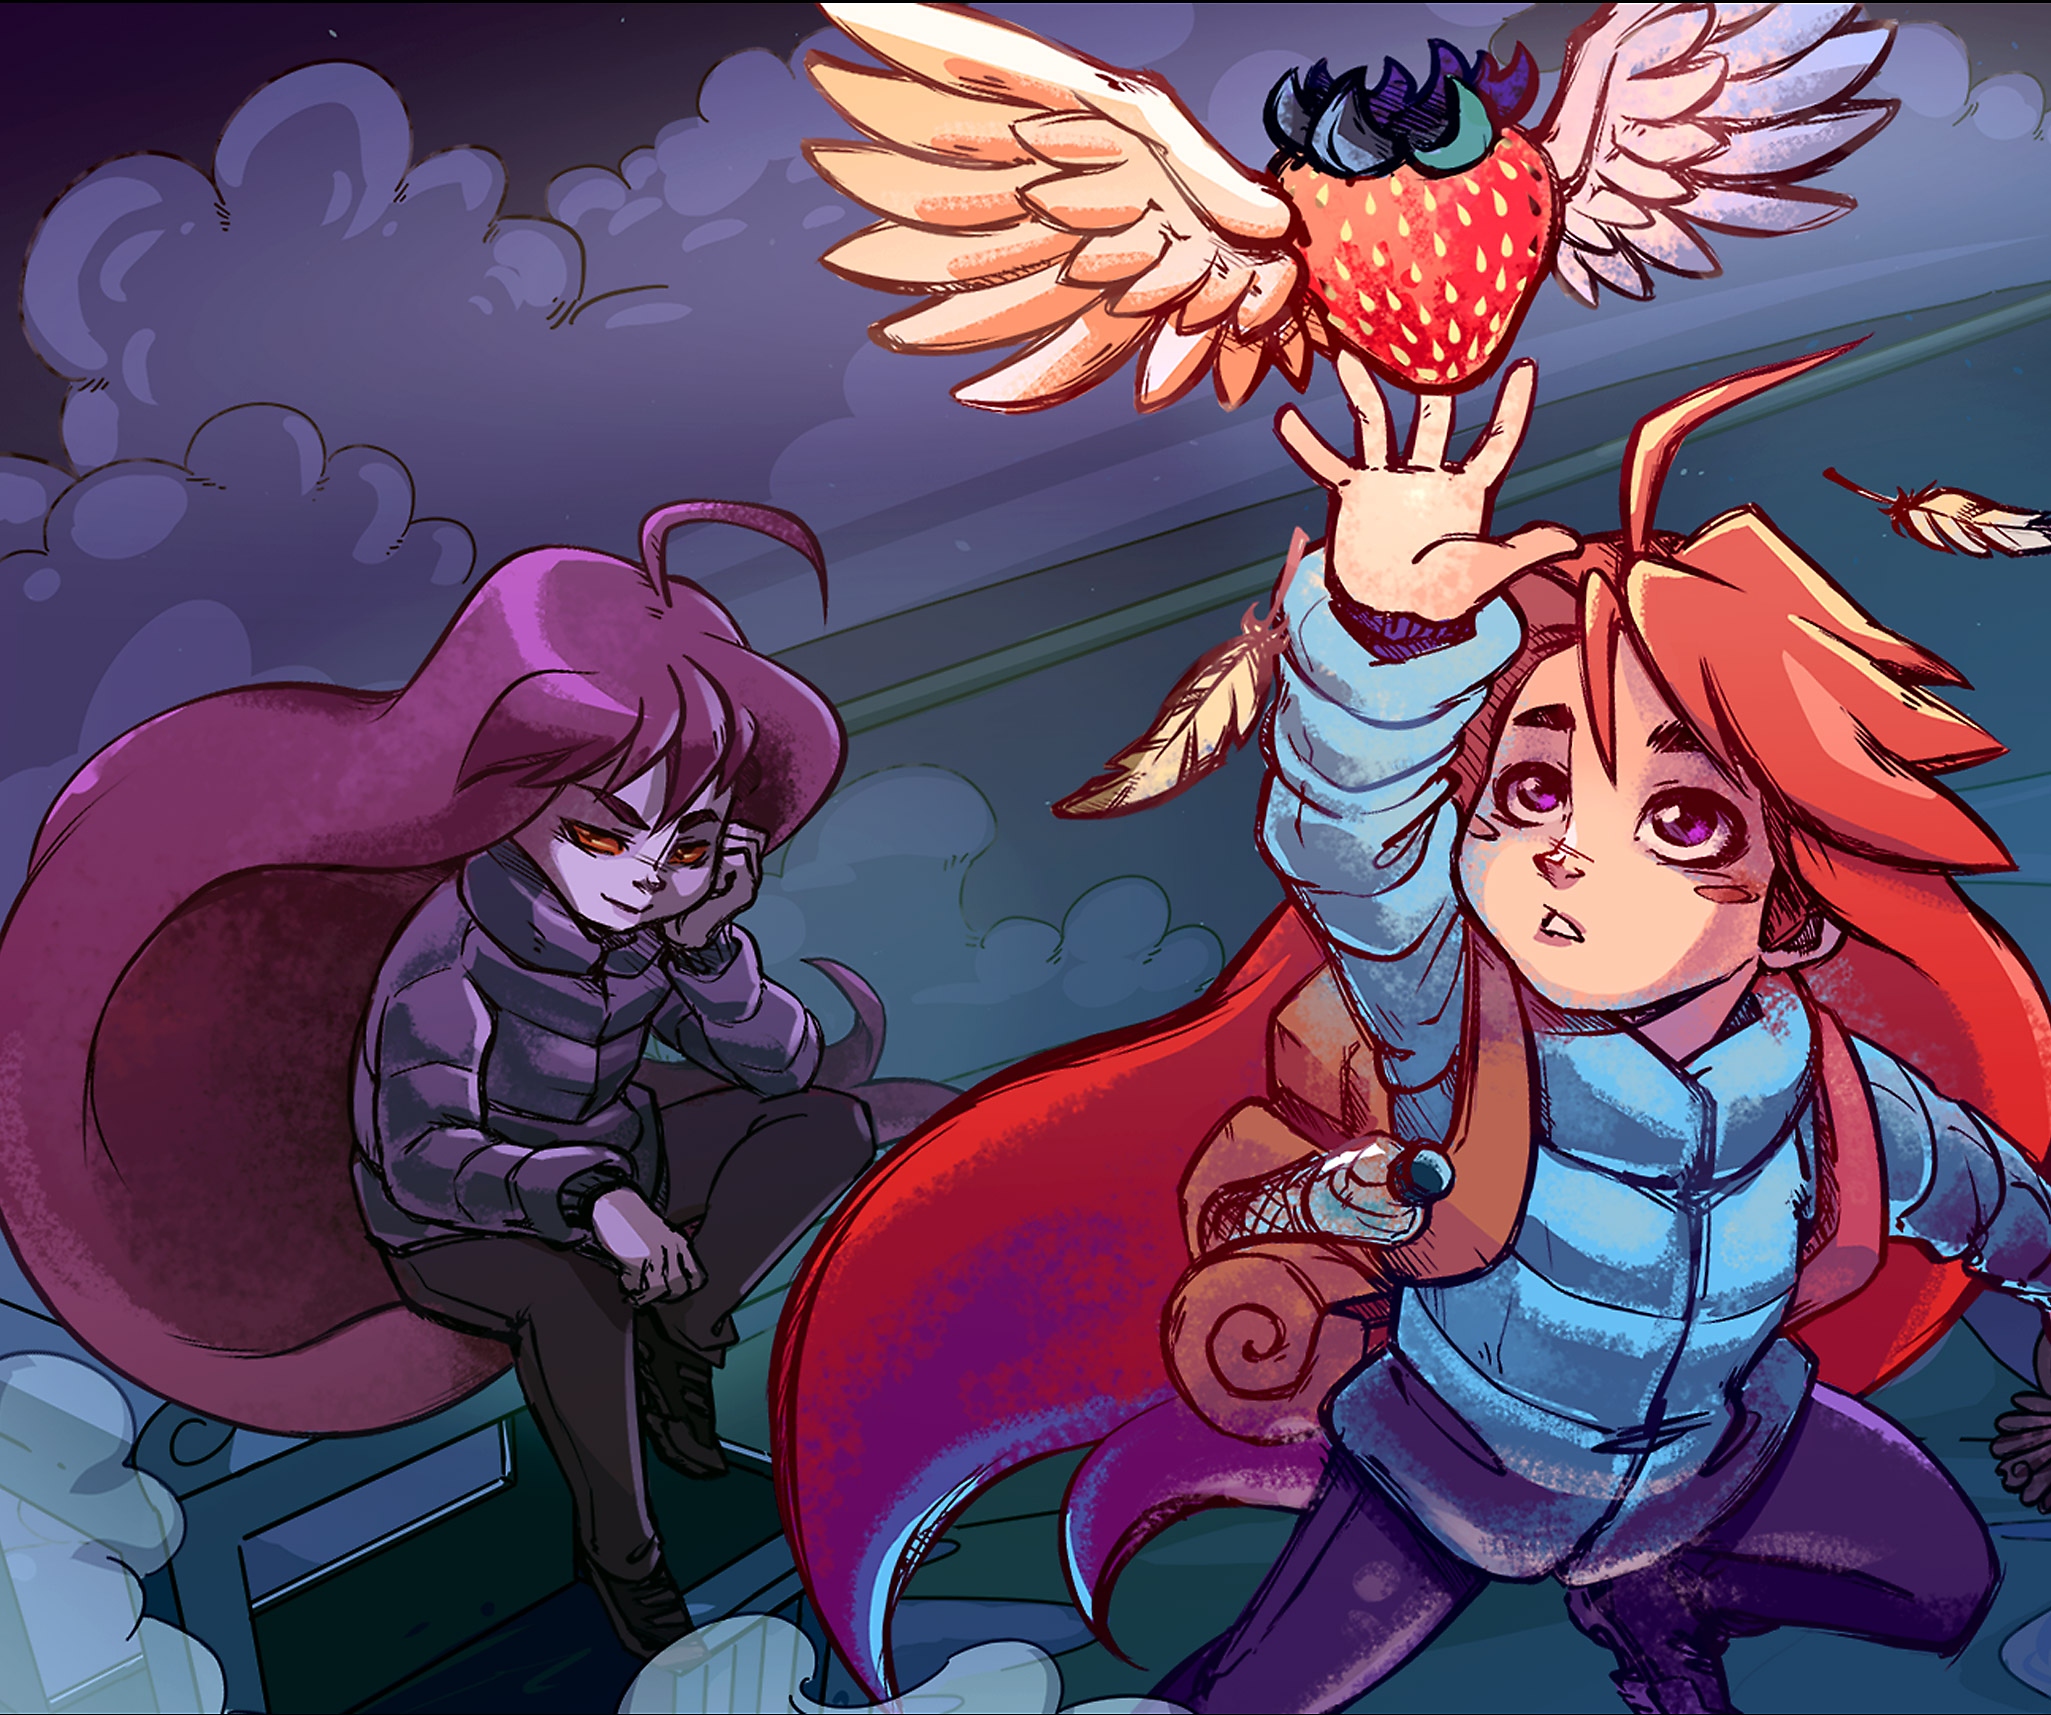 Celeste key art featuring hand drawn art of main character Madeleine reaching for a flying strawberry